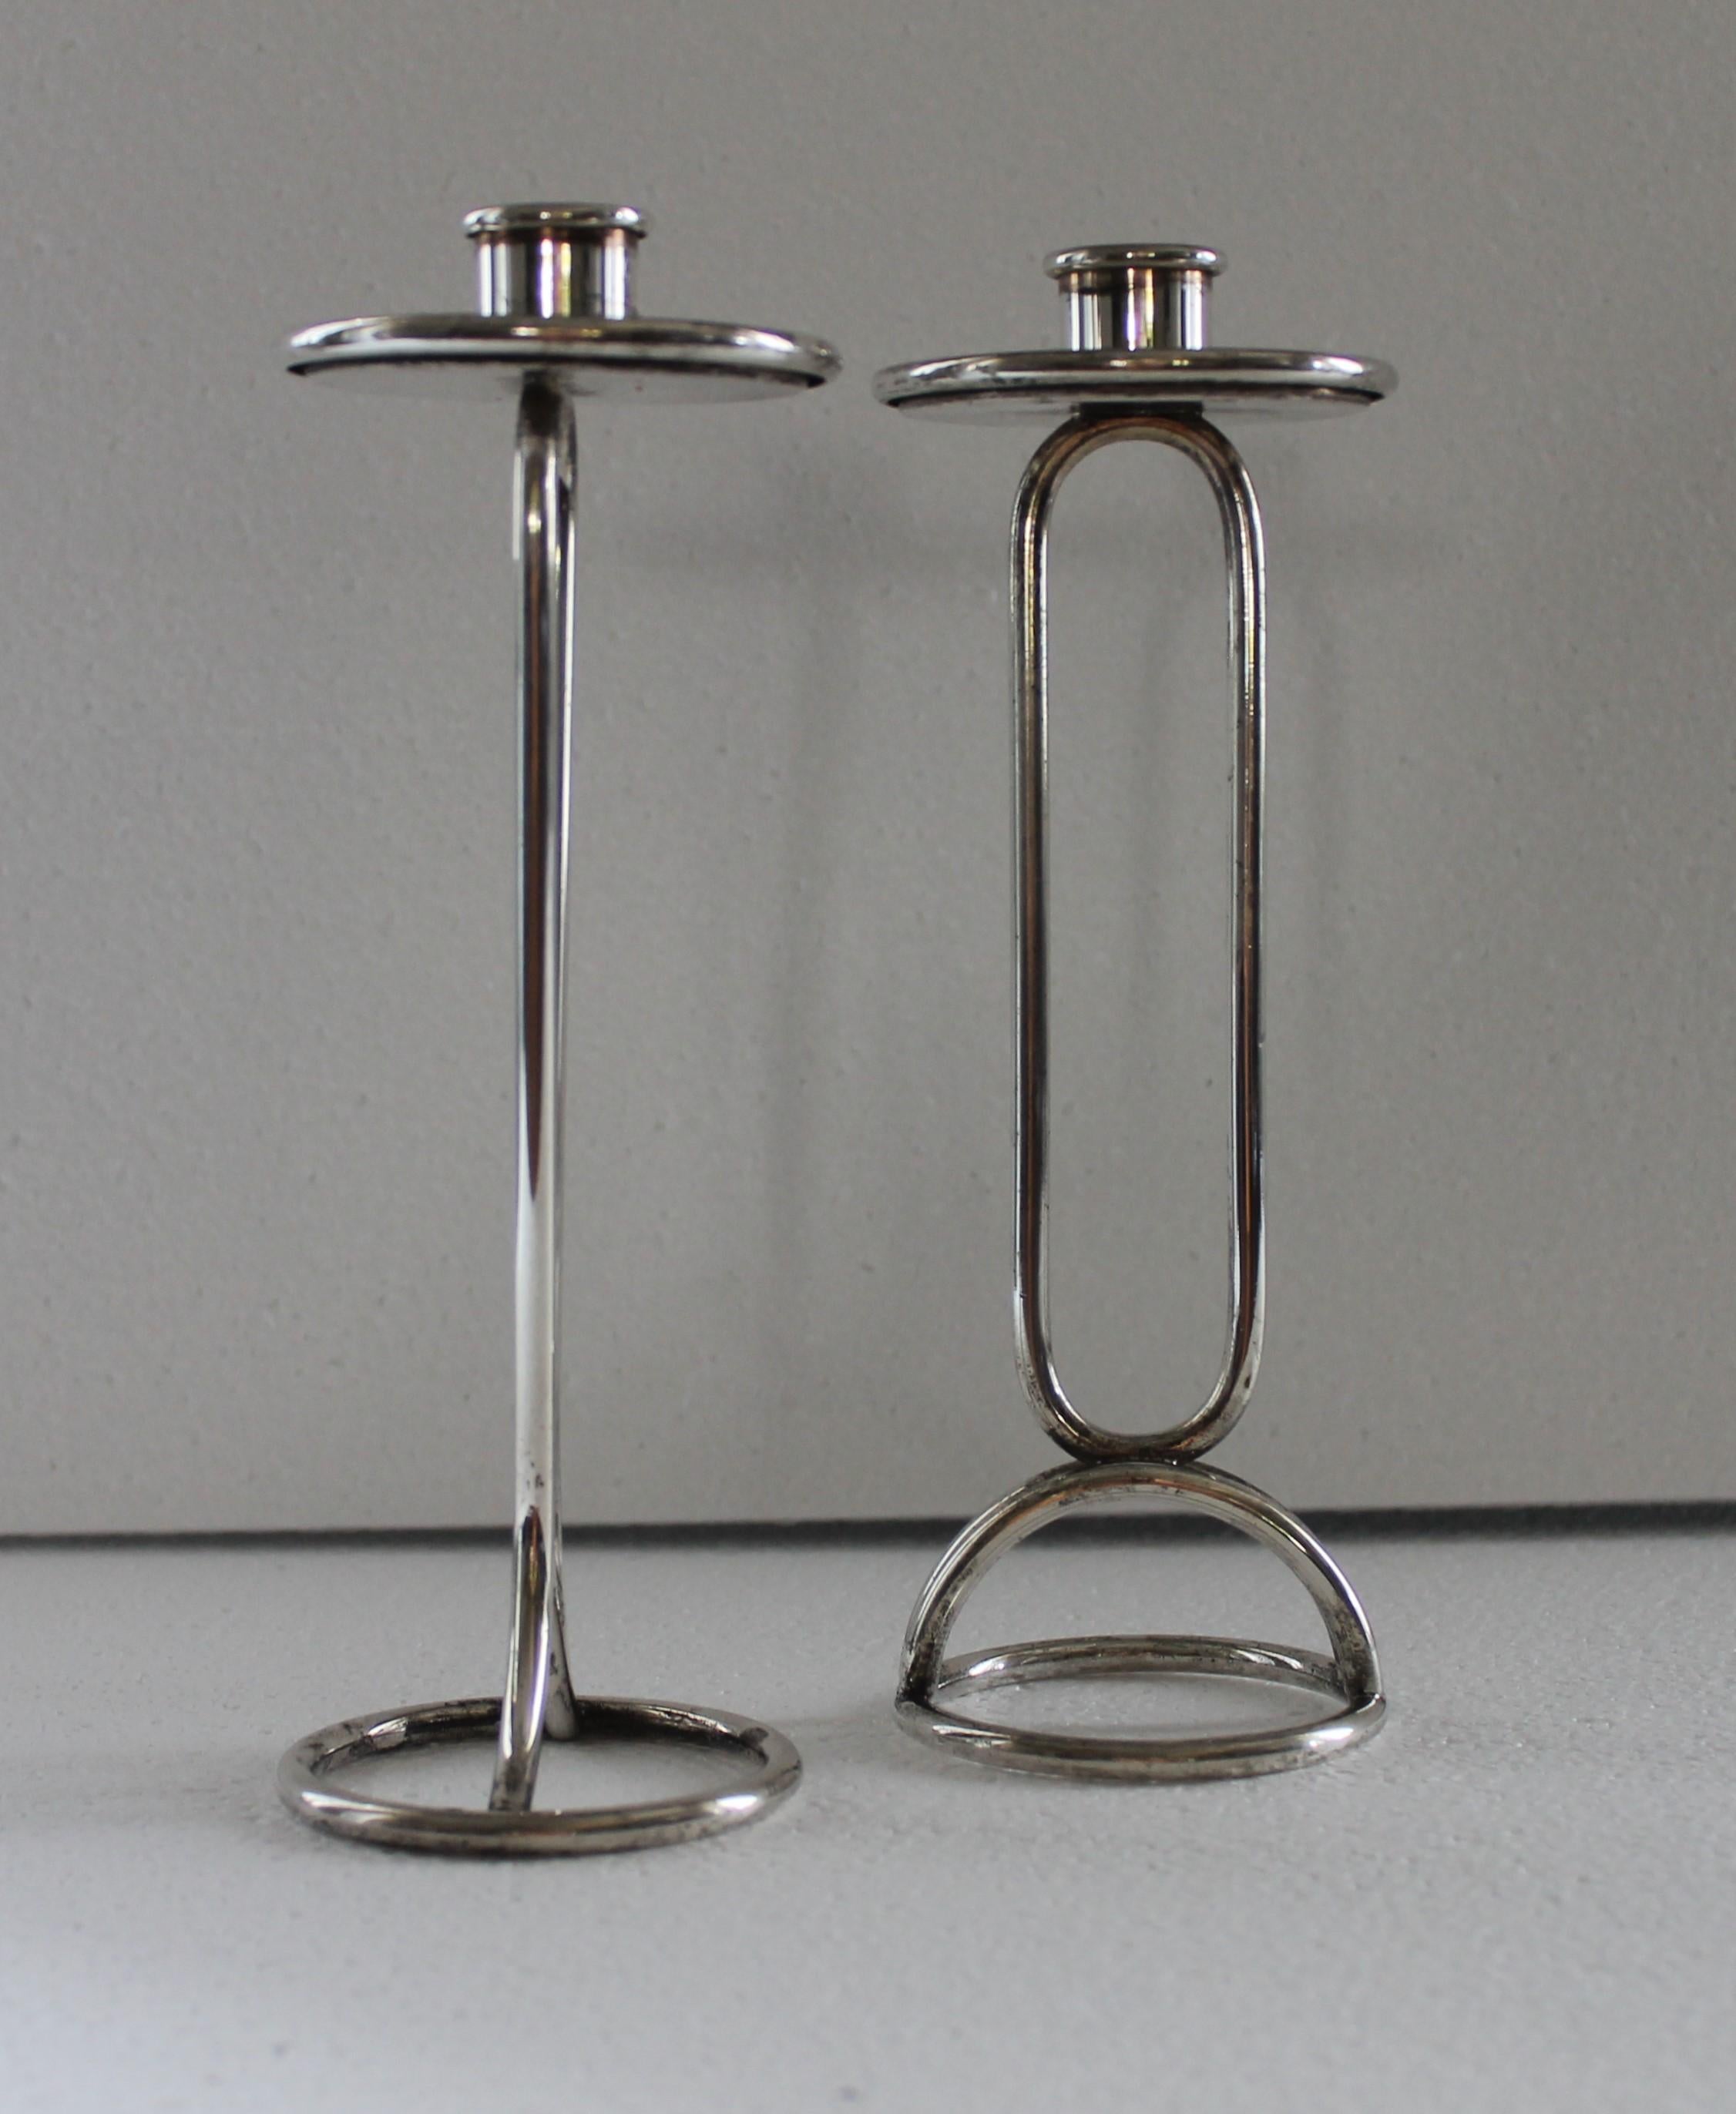 Pair of single candlesticks, silver plated, modern style (dated 1978), designed by Rizzato.